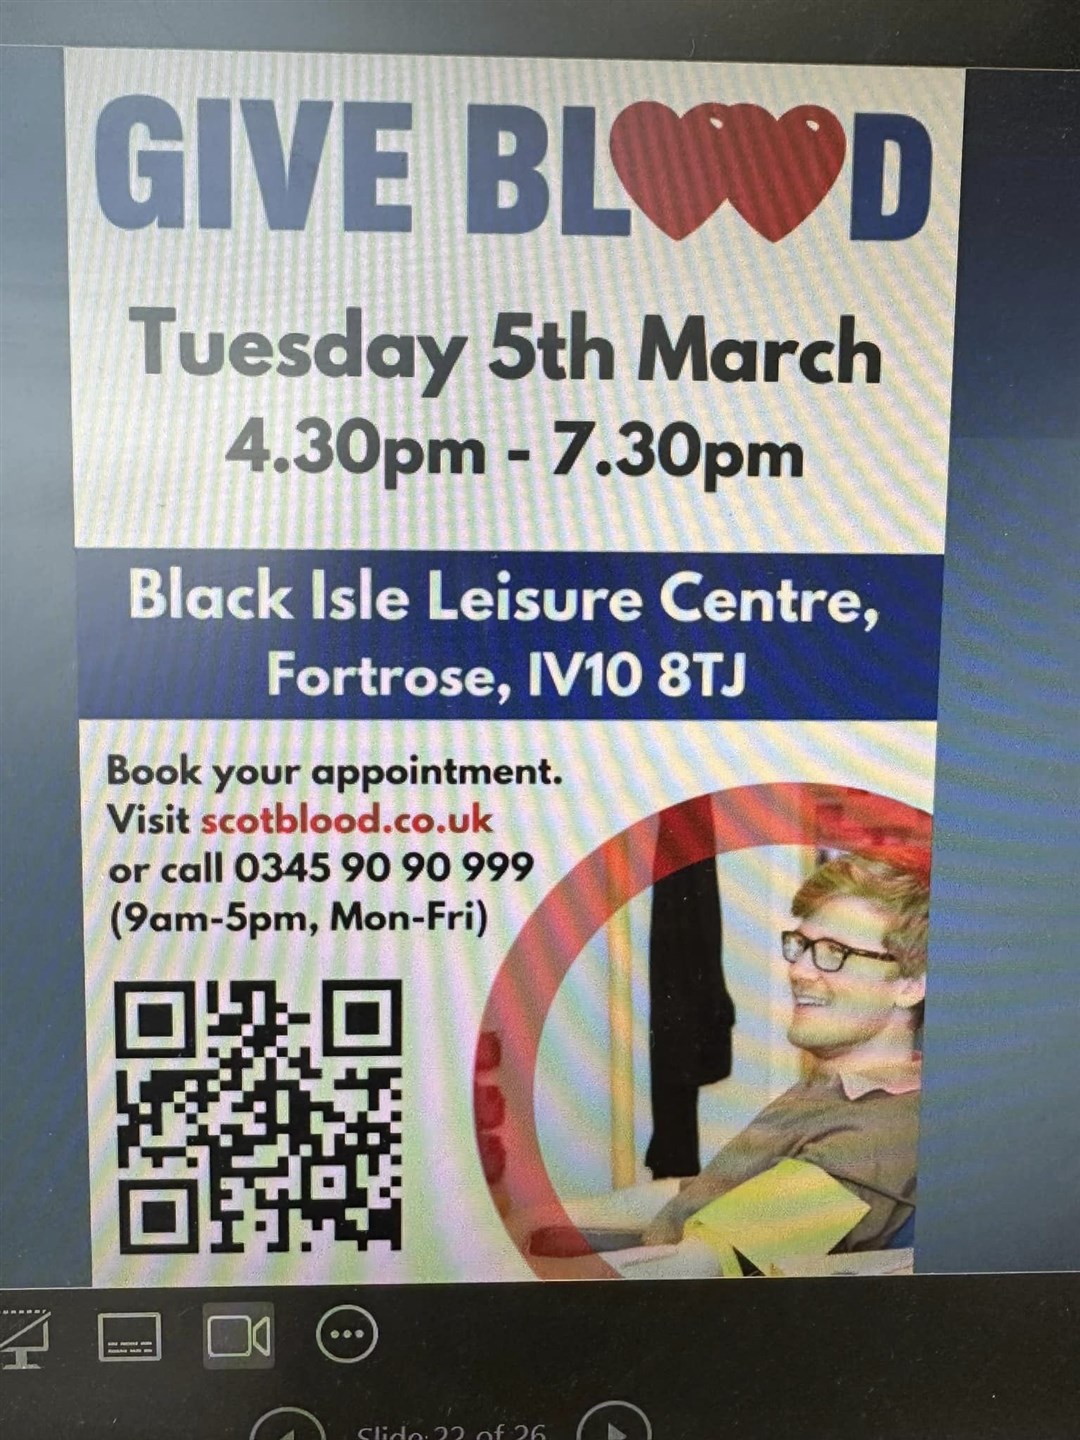 The next blood donation session is coming up in Fortrose at the Black Isle Leisure Centre.